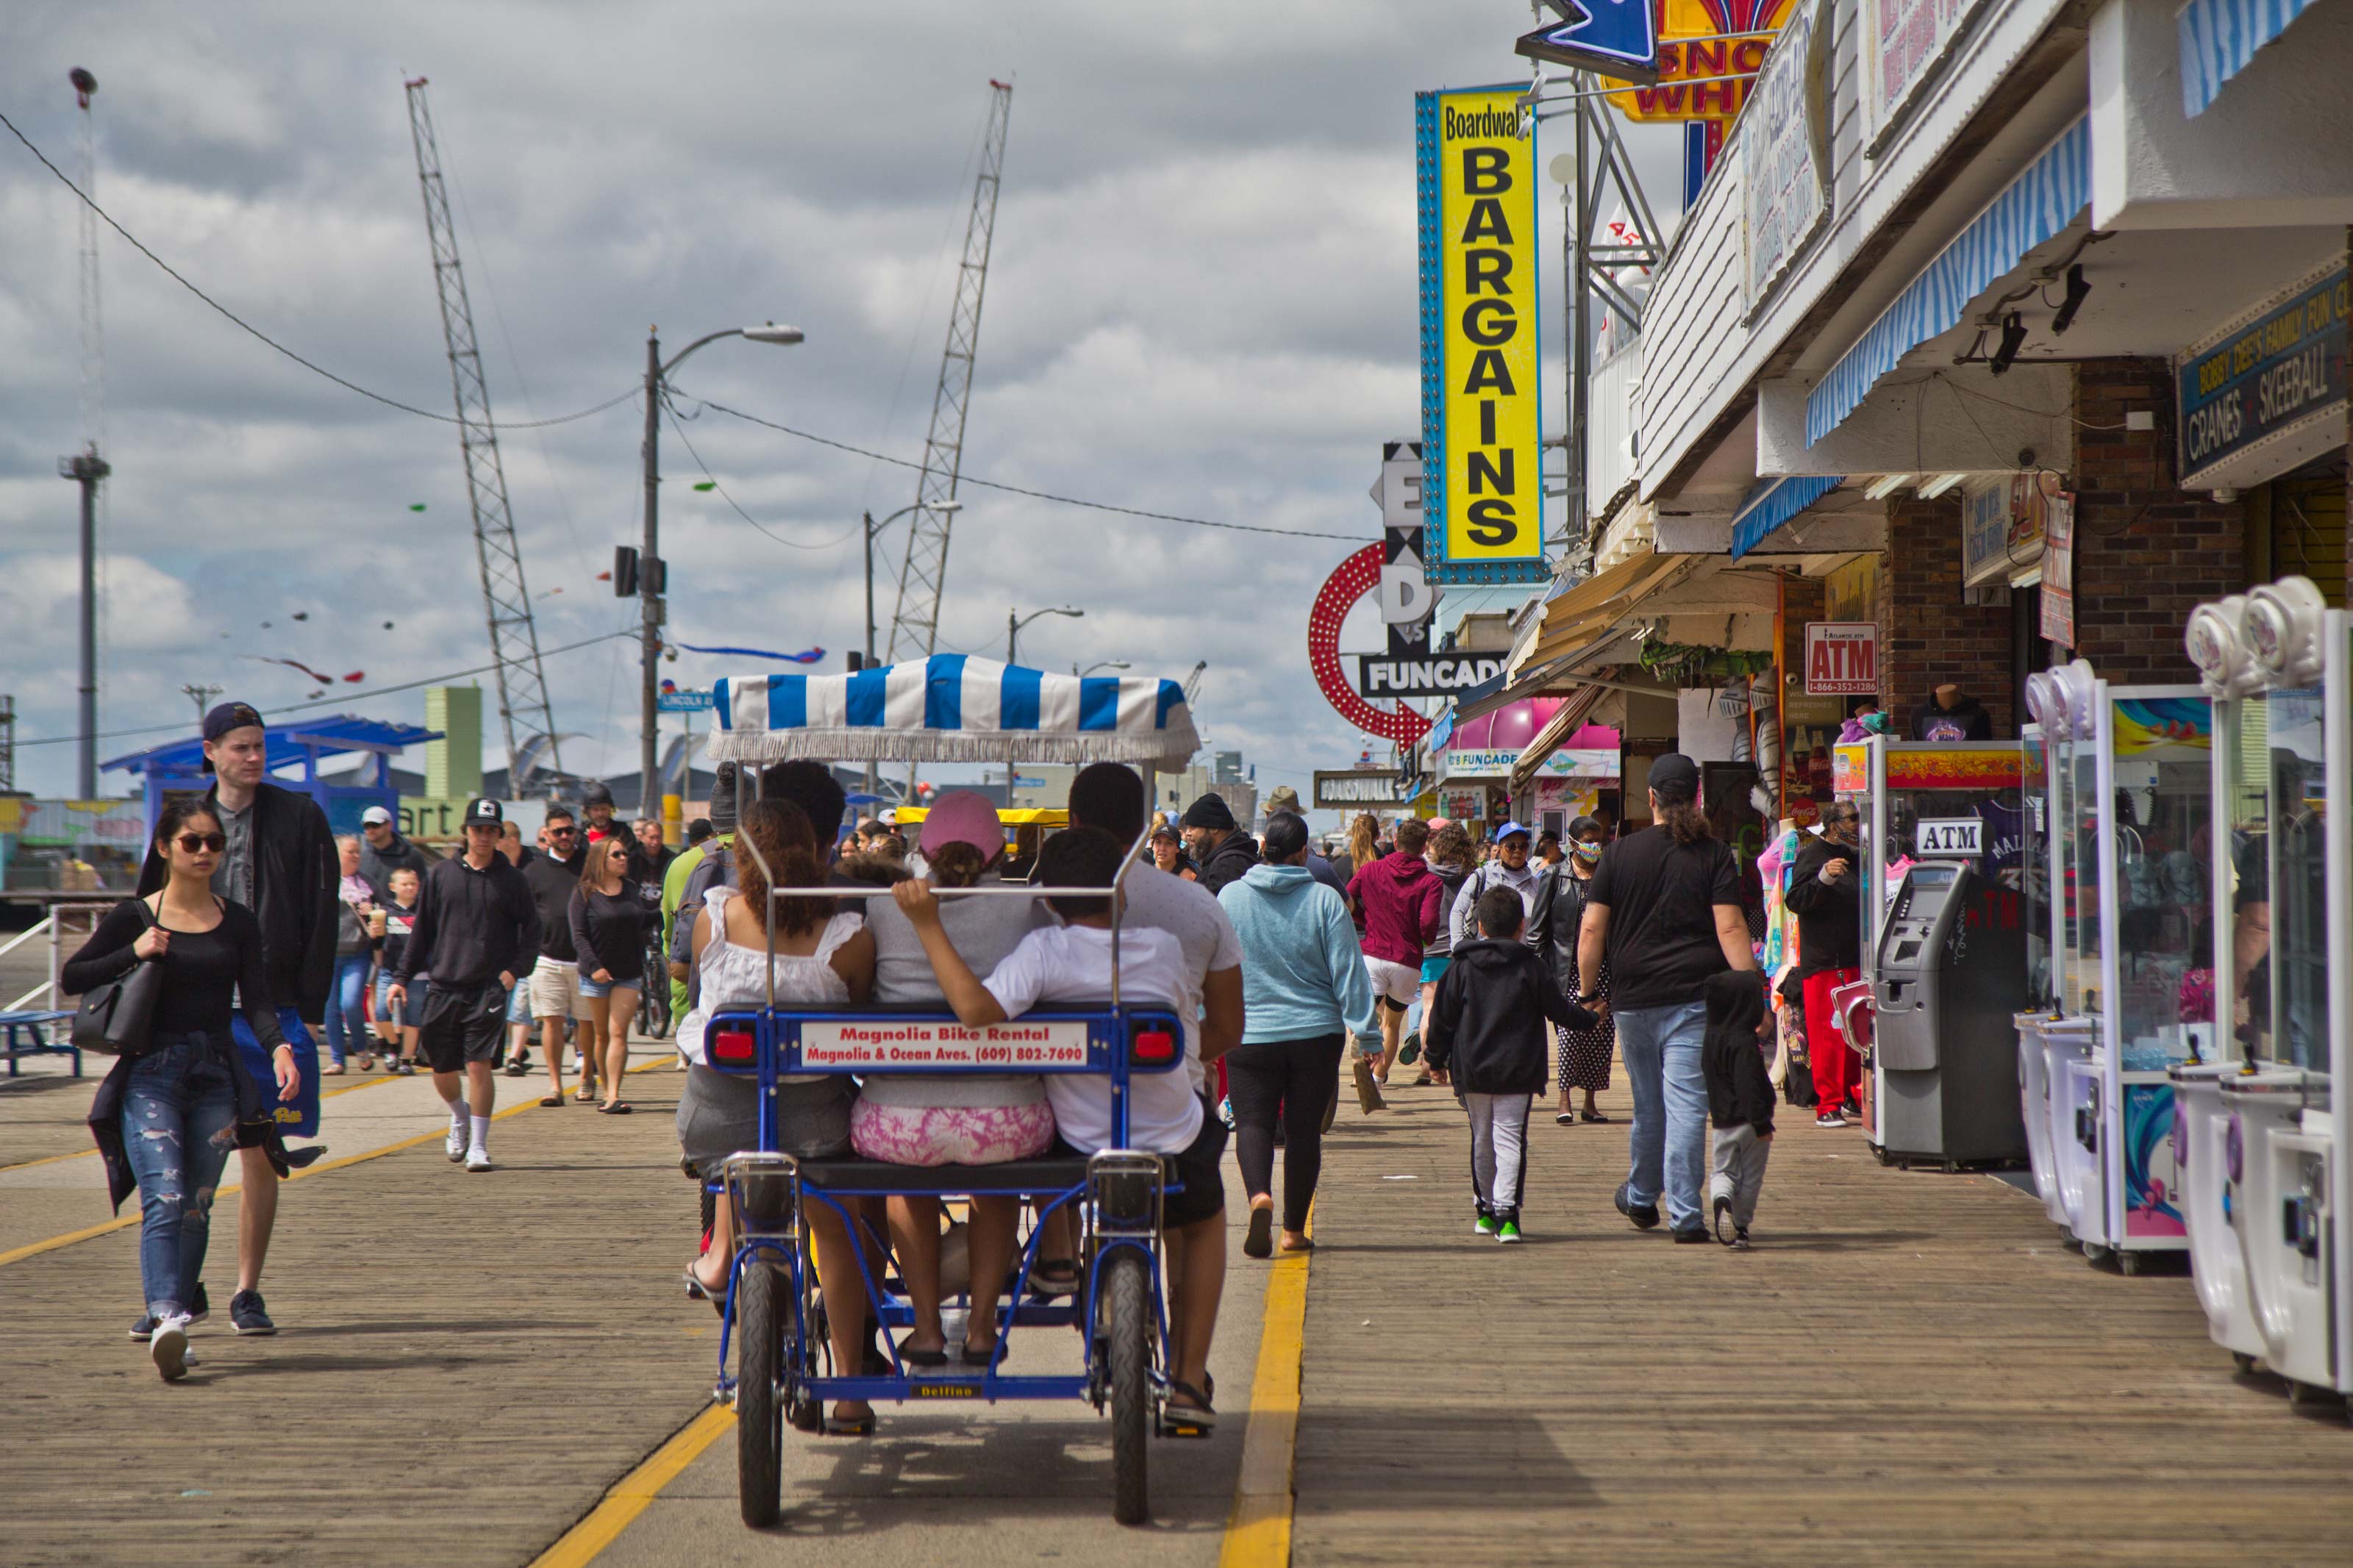 Vibrant and bustling boardwalk at Jersey Shore, New Jersey